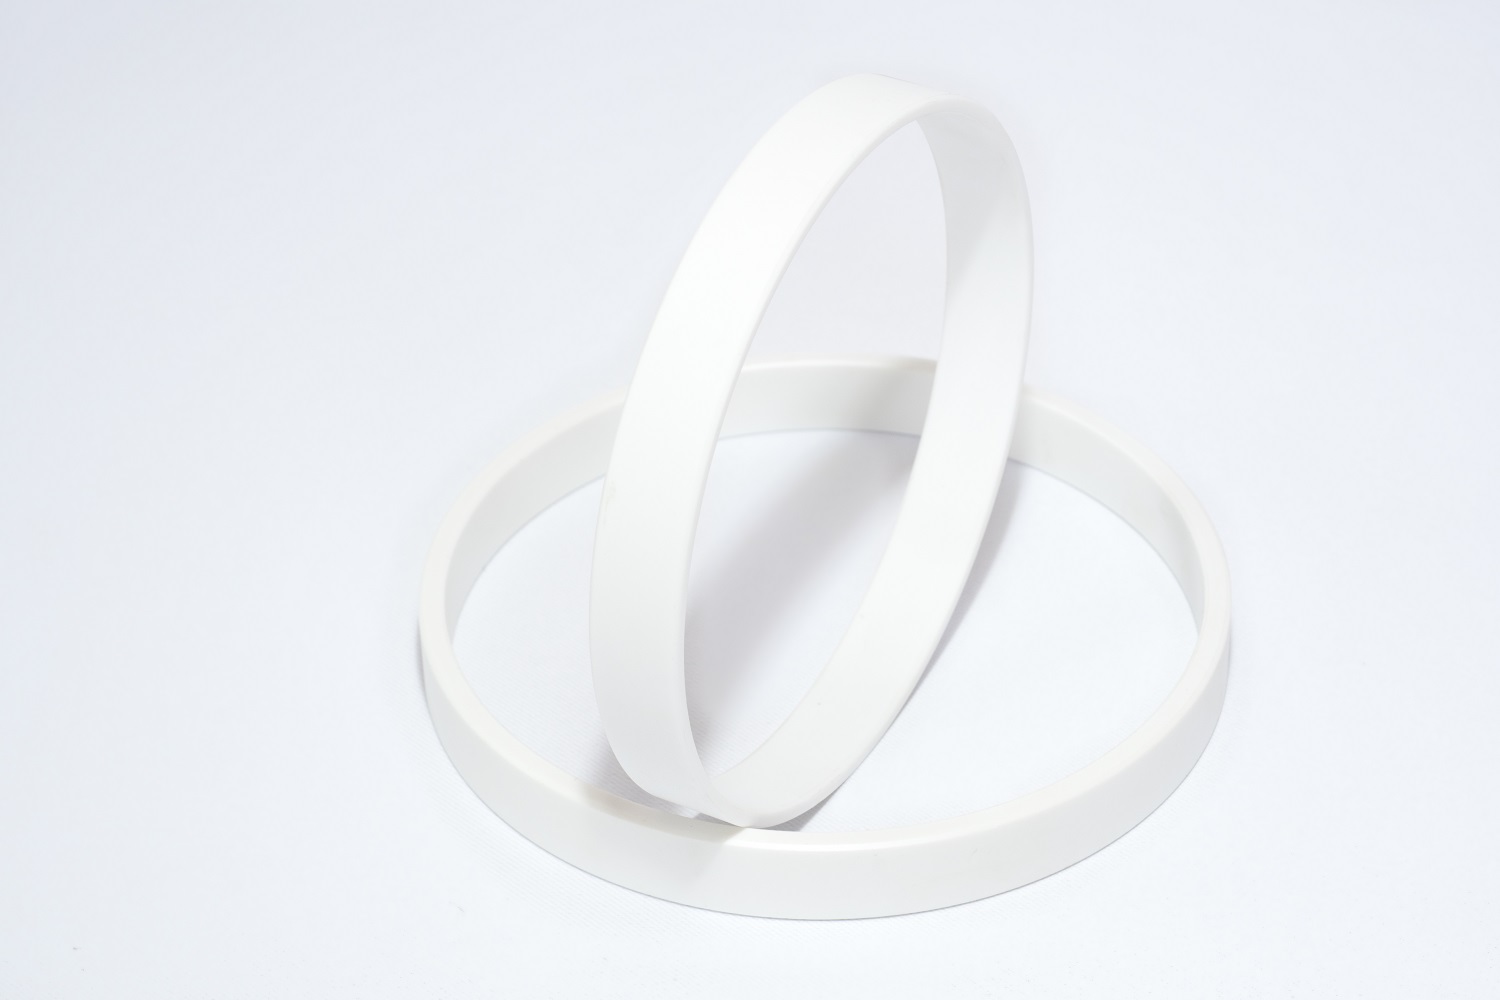 The wear rings are made from the thermoplastic Vesconite Hilube, which is a low-friction, wear-resistant pol-ymer that replaces traditional metals.